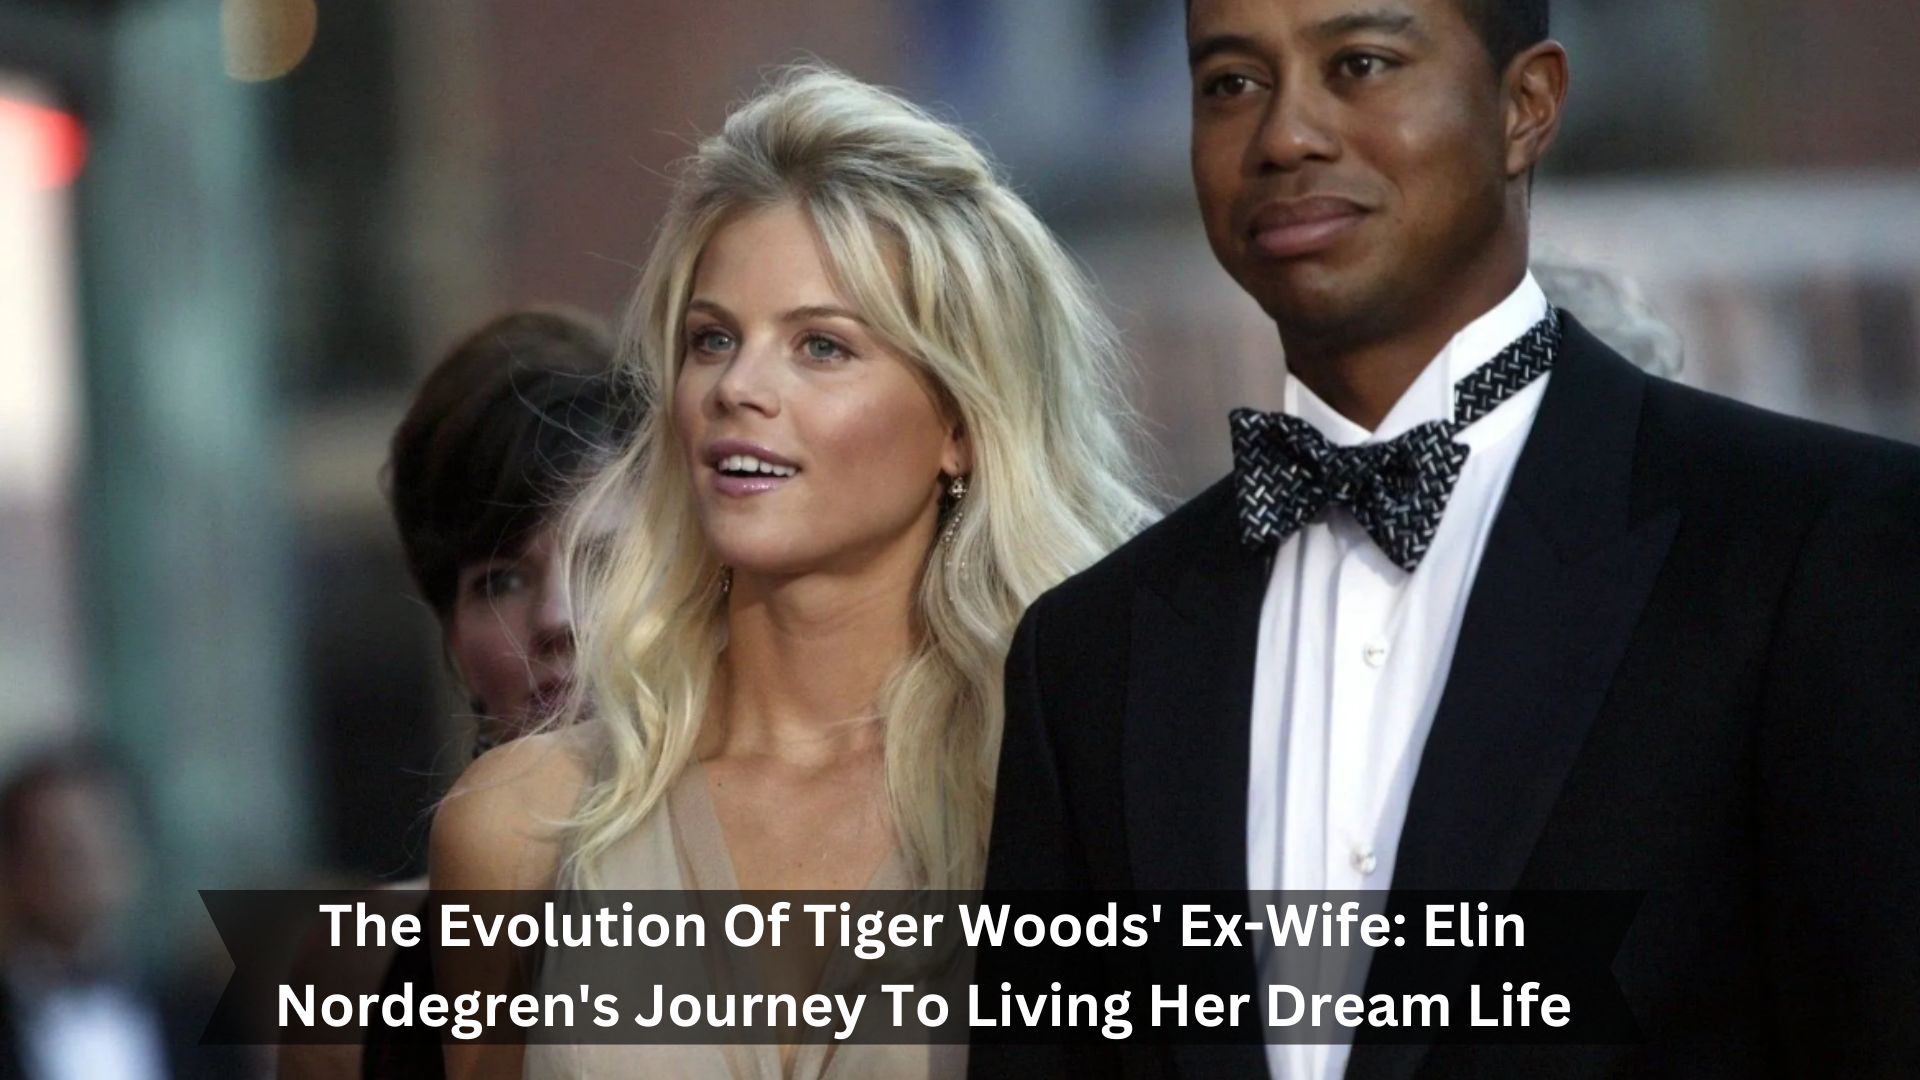 The-Evolution-Of-Tiger-Woods-Ex-Wife-Elin-Nordegrens-Journey-To-Living-Her-Dream-Life